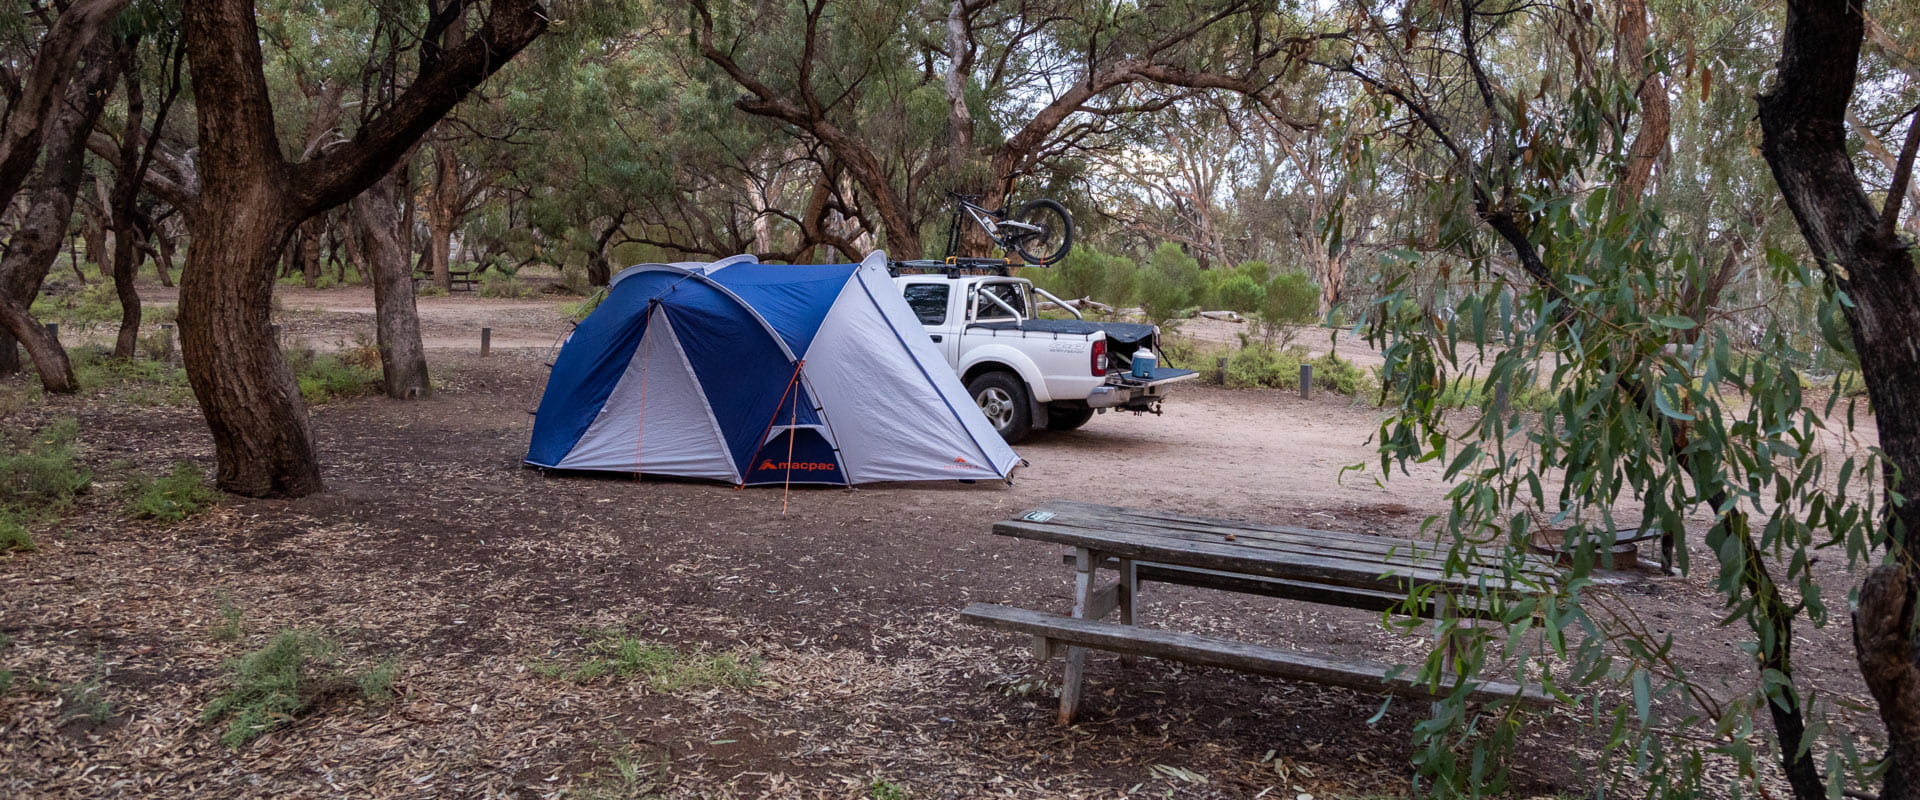 A tent pitched in a bushland campsite under the cover of trees, with a truck and wooden picnic table nearby.